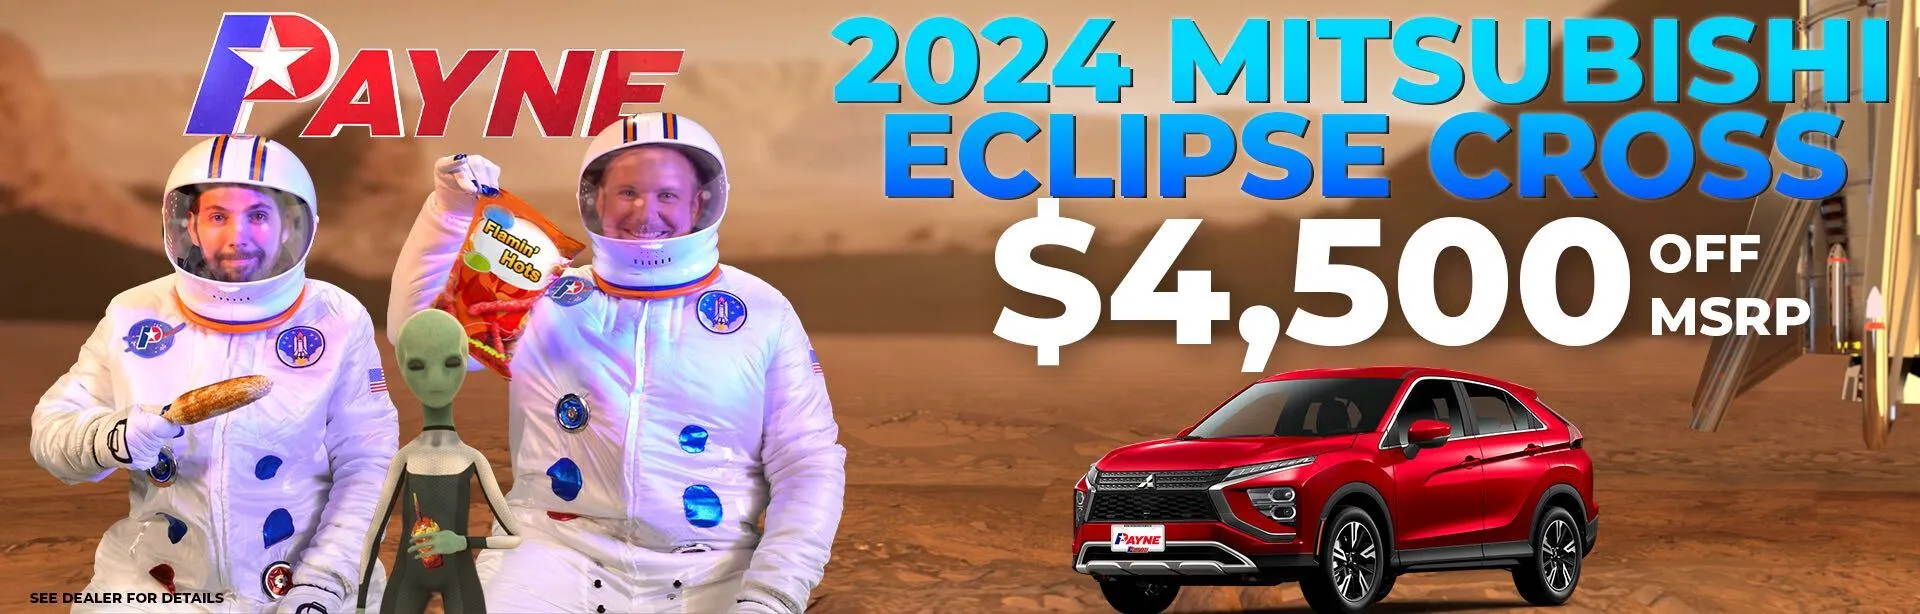 Get $4,500 off MSRP on a 2024 Mitsubishi Eclipse Cross!